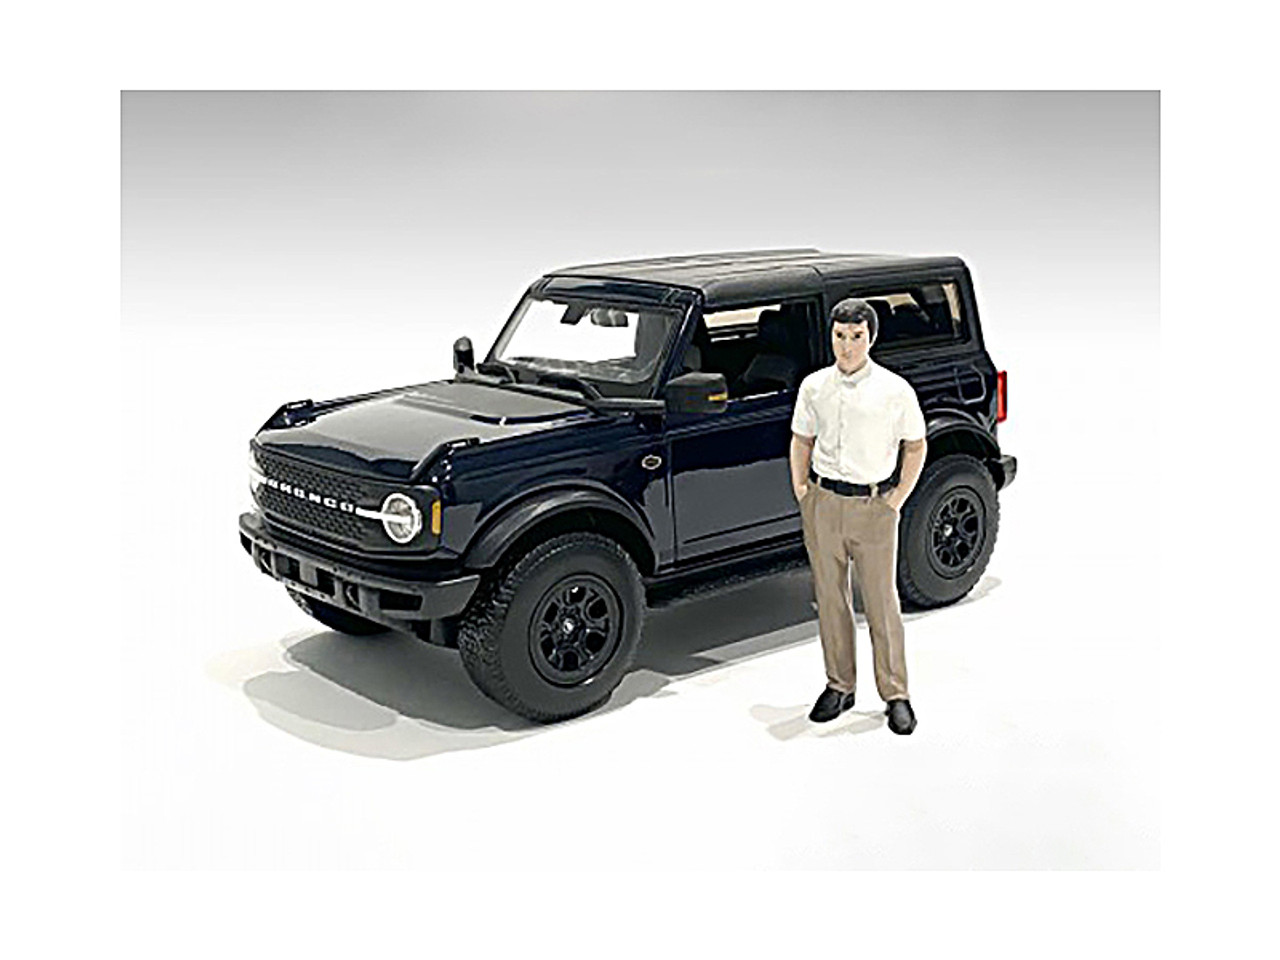 "The Dealership" Customer I Figurine for 1/24 Scale Models by American Diorama